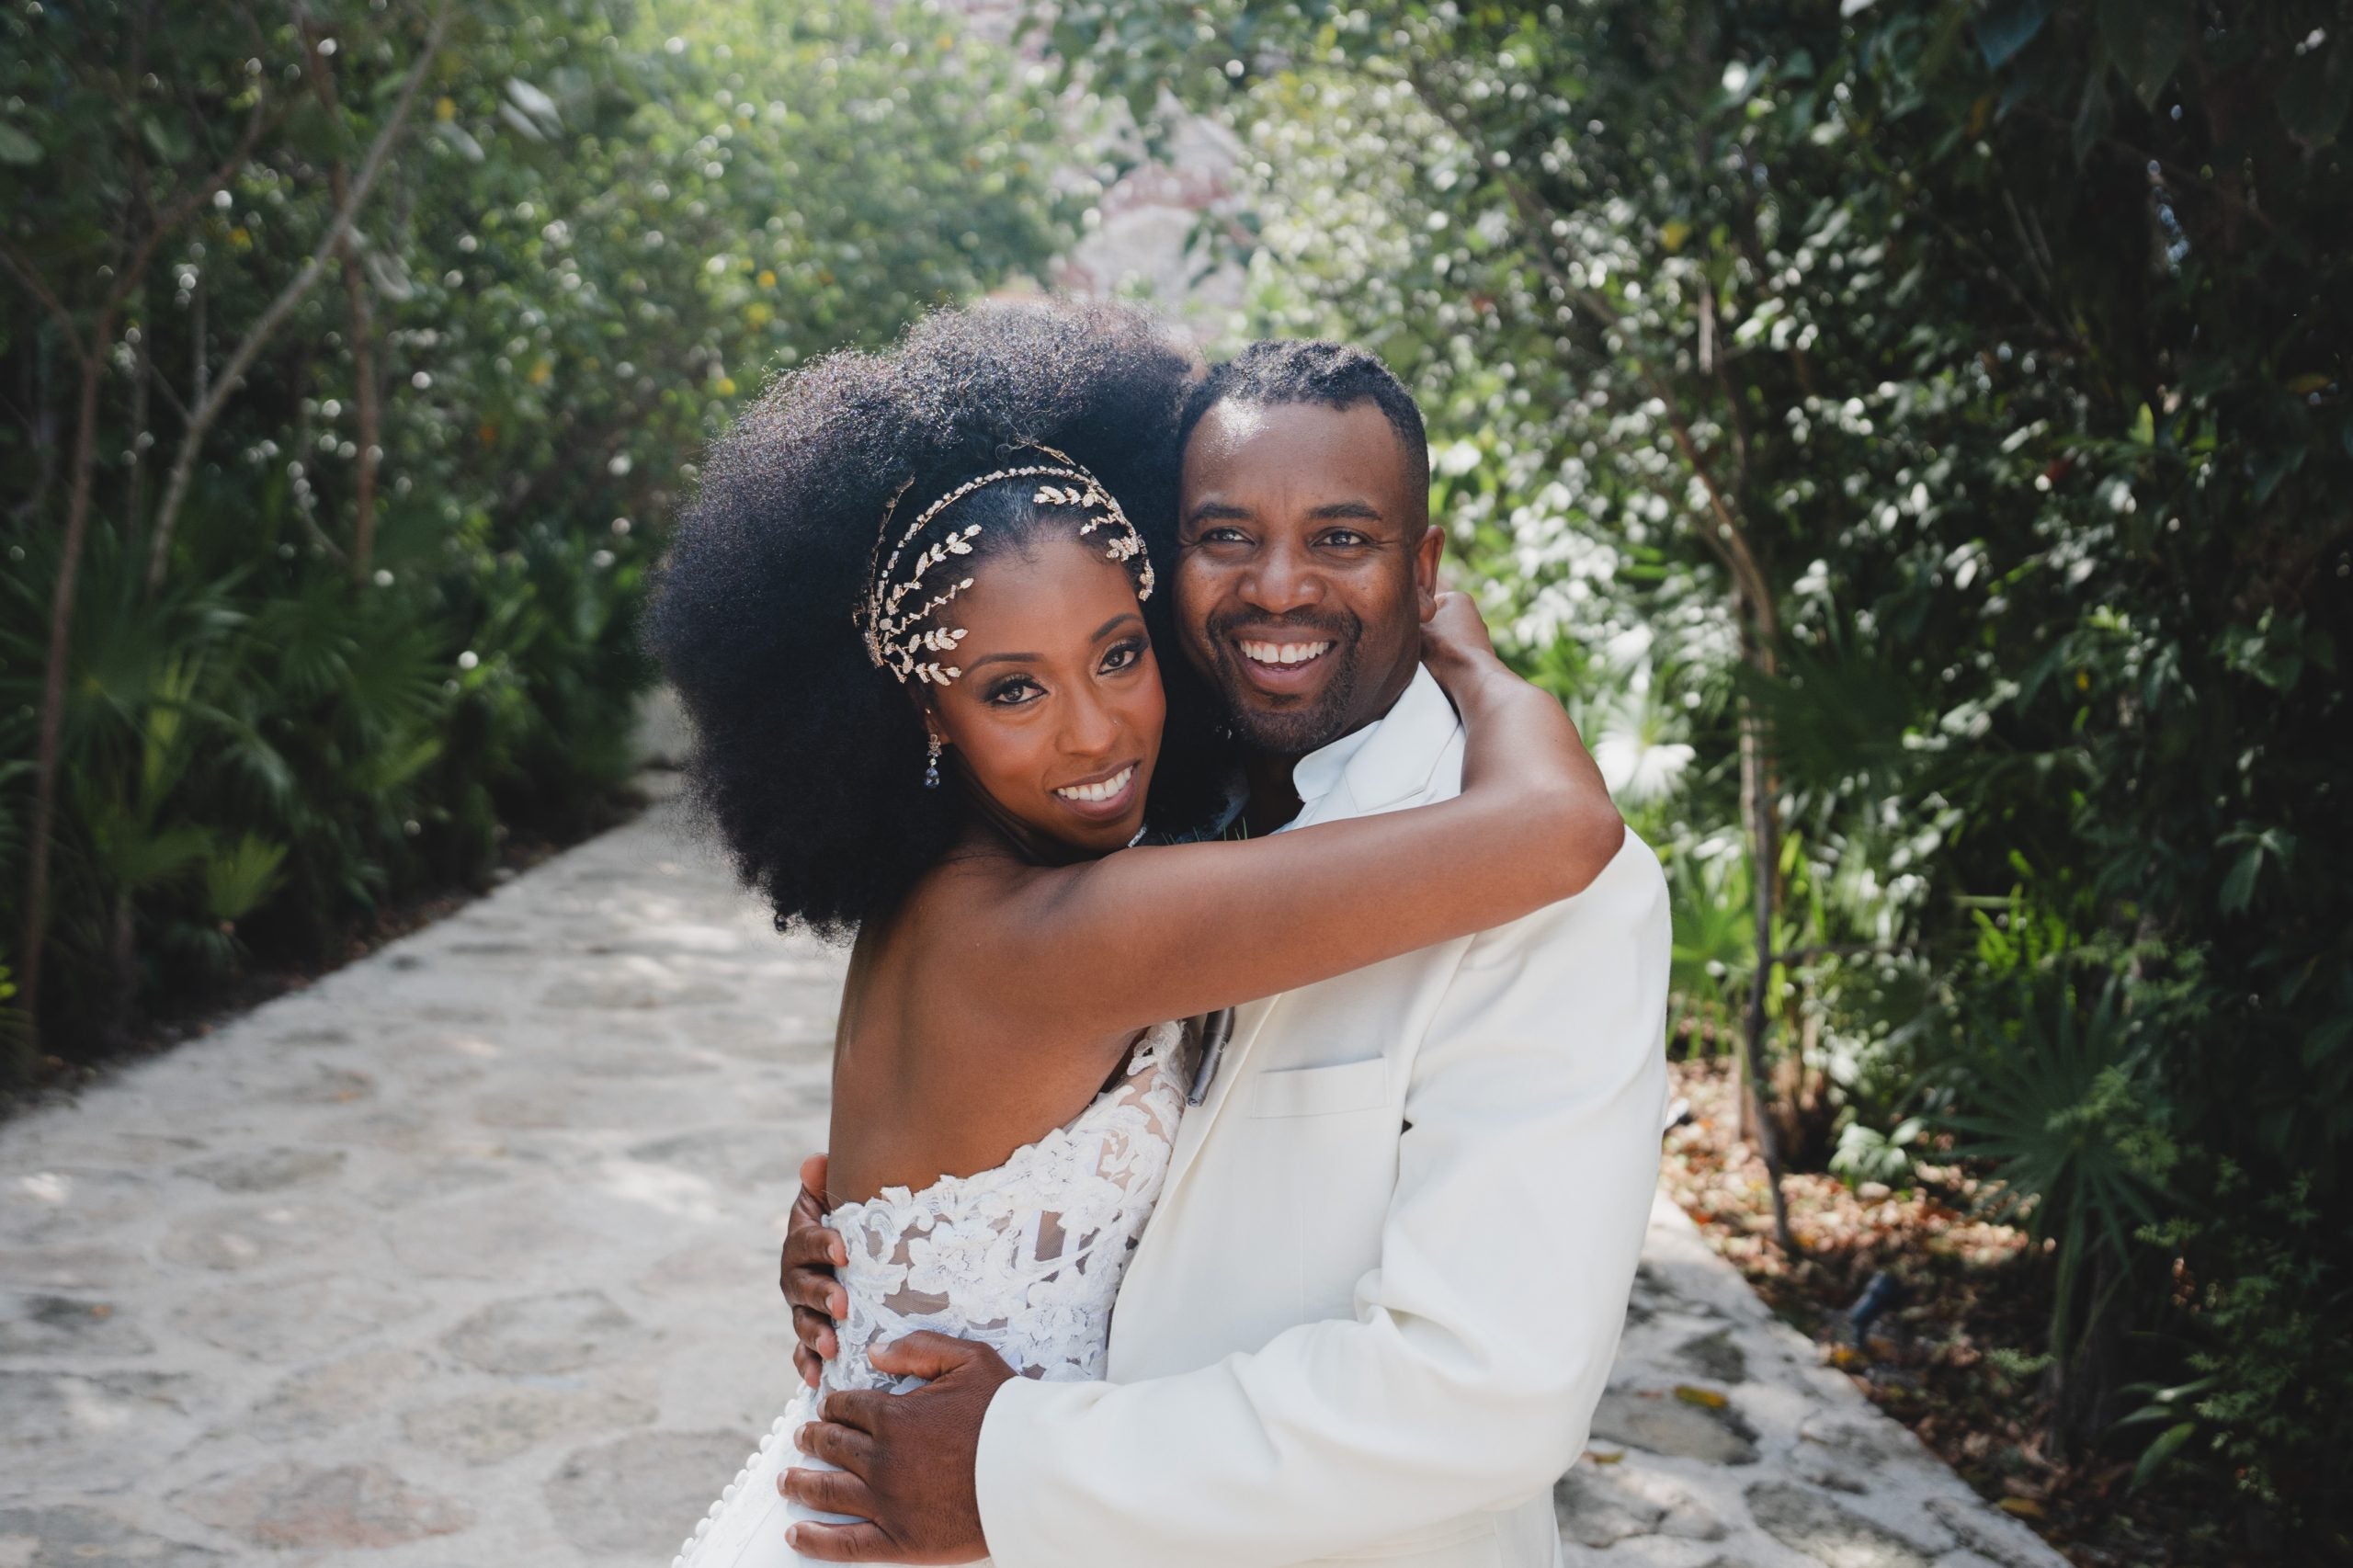 Bridal Bliss: With The Caribbean Sea As Their Backdrop, Vanessa And Kevin Had A Boho-Chic Beach Wedding